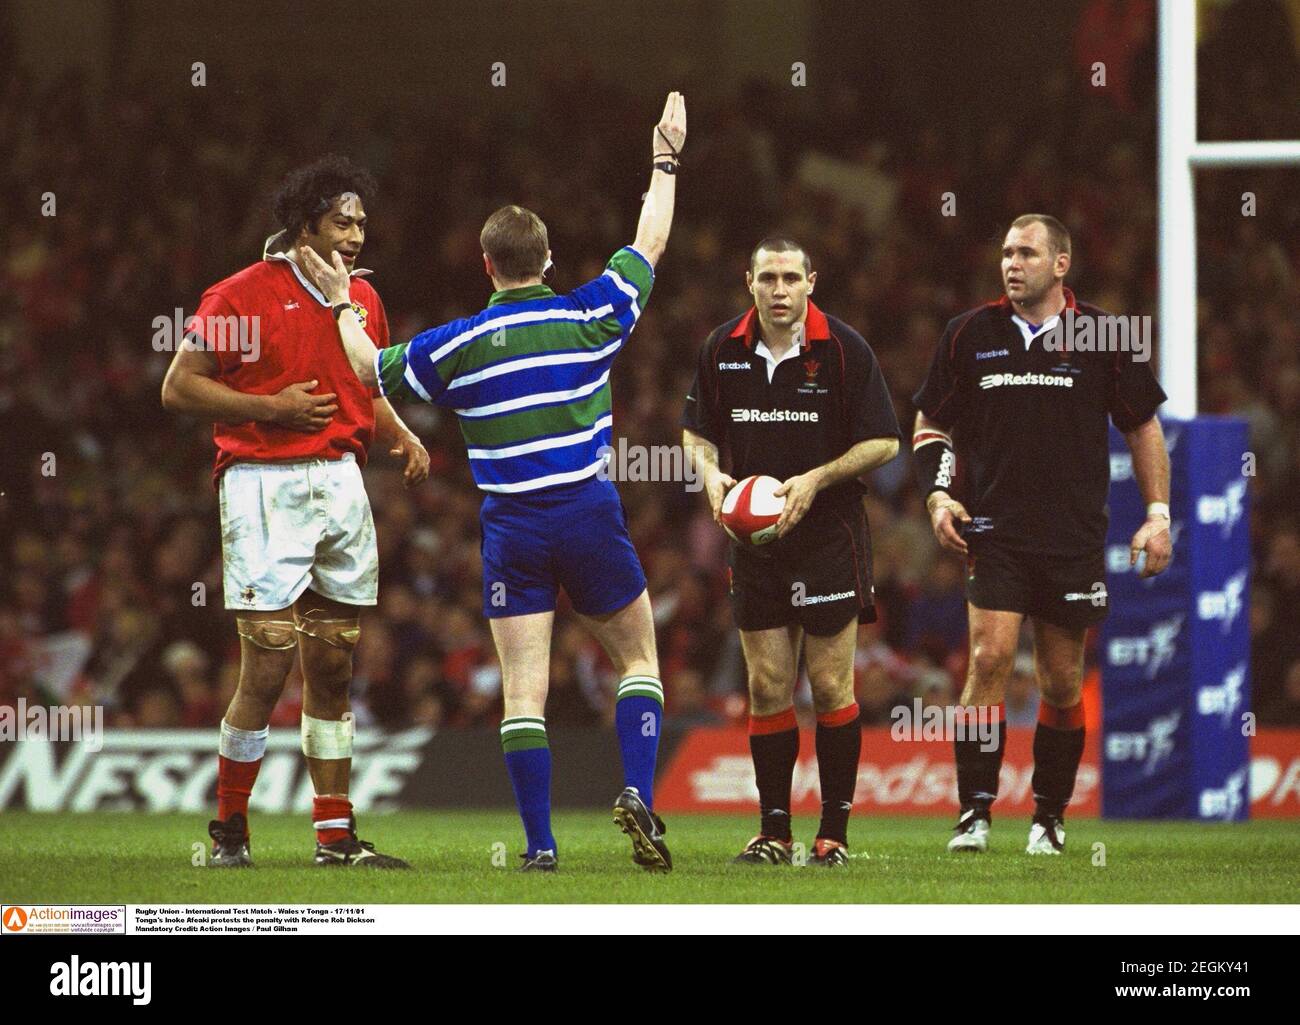 Rugby Union - International Test Match - Wales v Tonga - 17/11/01 Tonga's  Inoke Afeaki protests the penalty with Referee Rob Dickson Mandatory  Credit: Action Images / Paul Gilham Stock Photo - Alamy